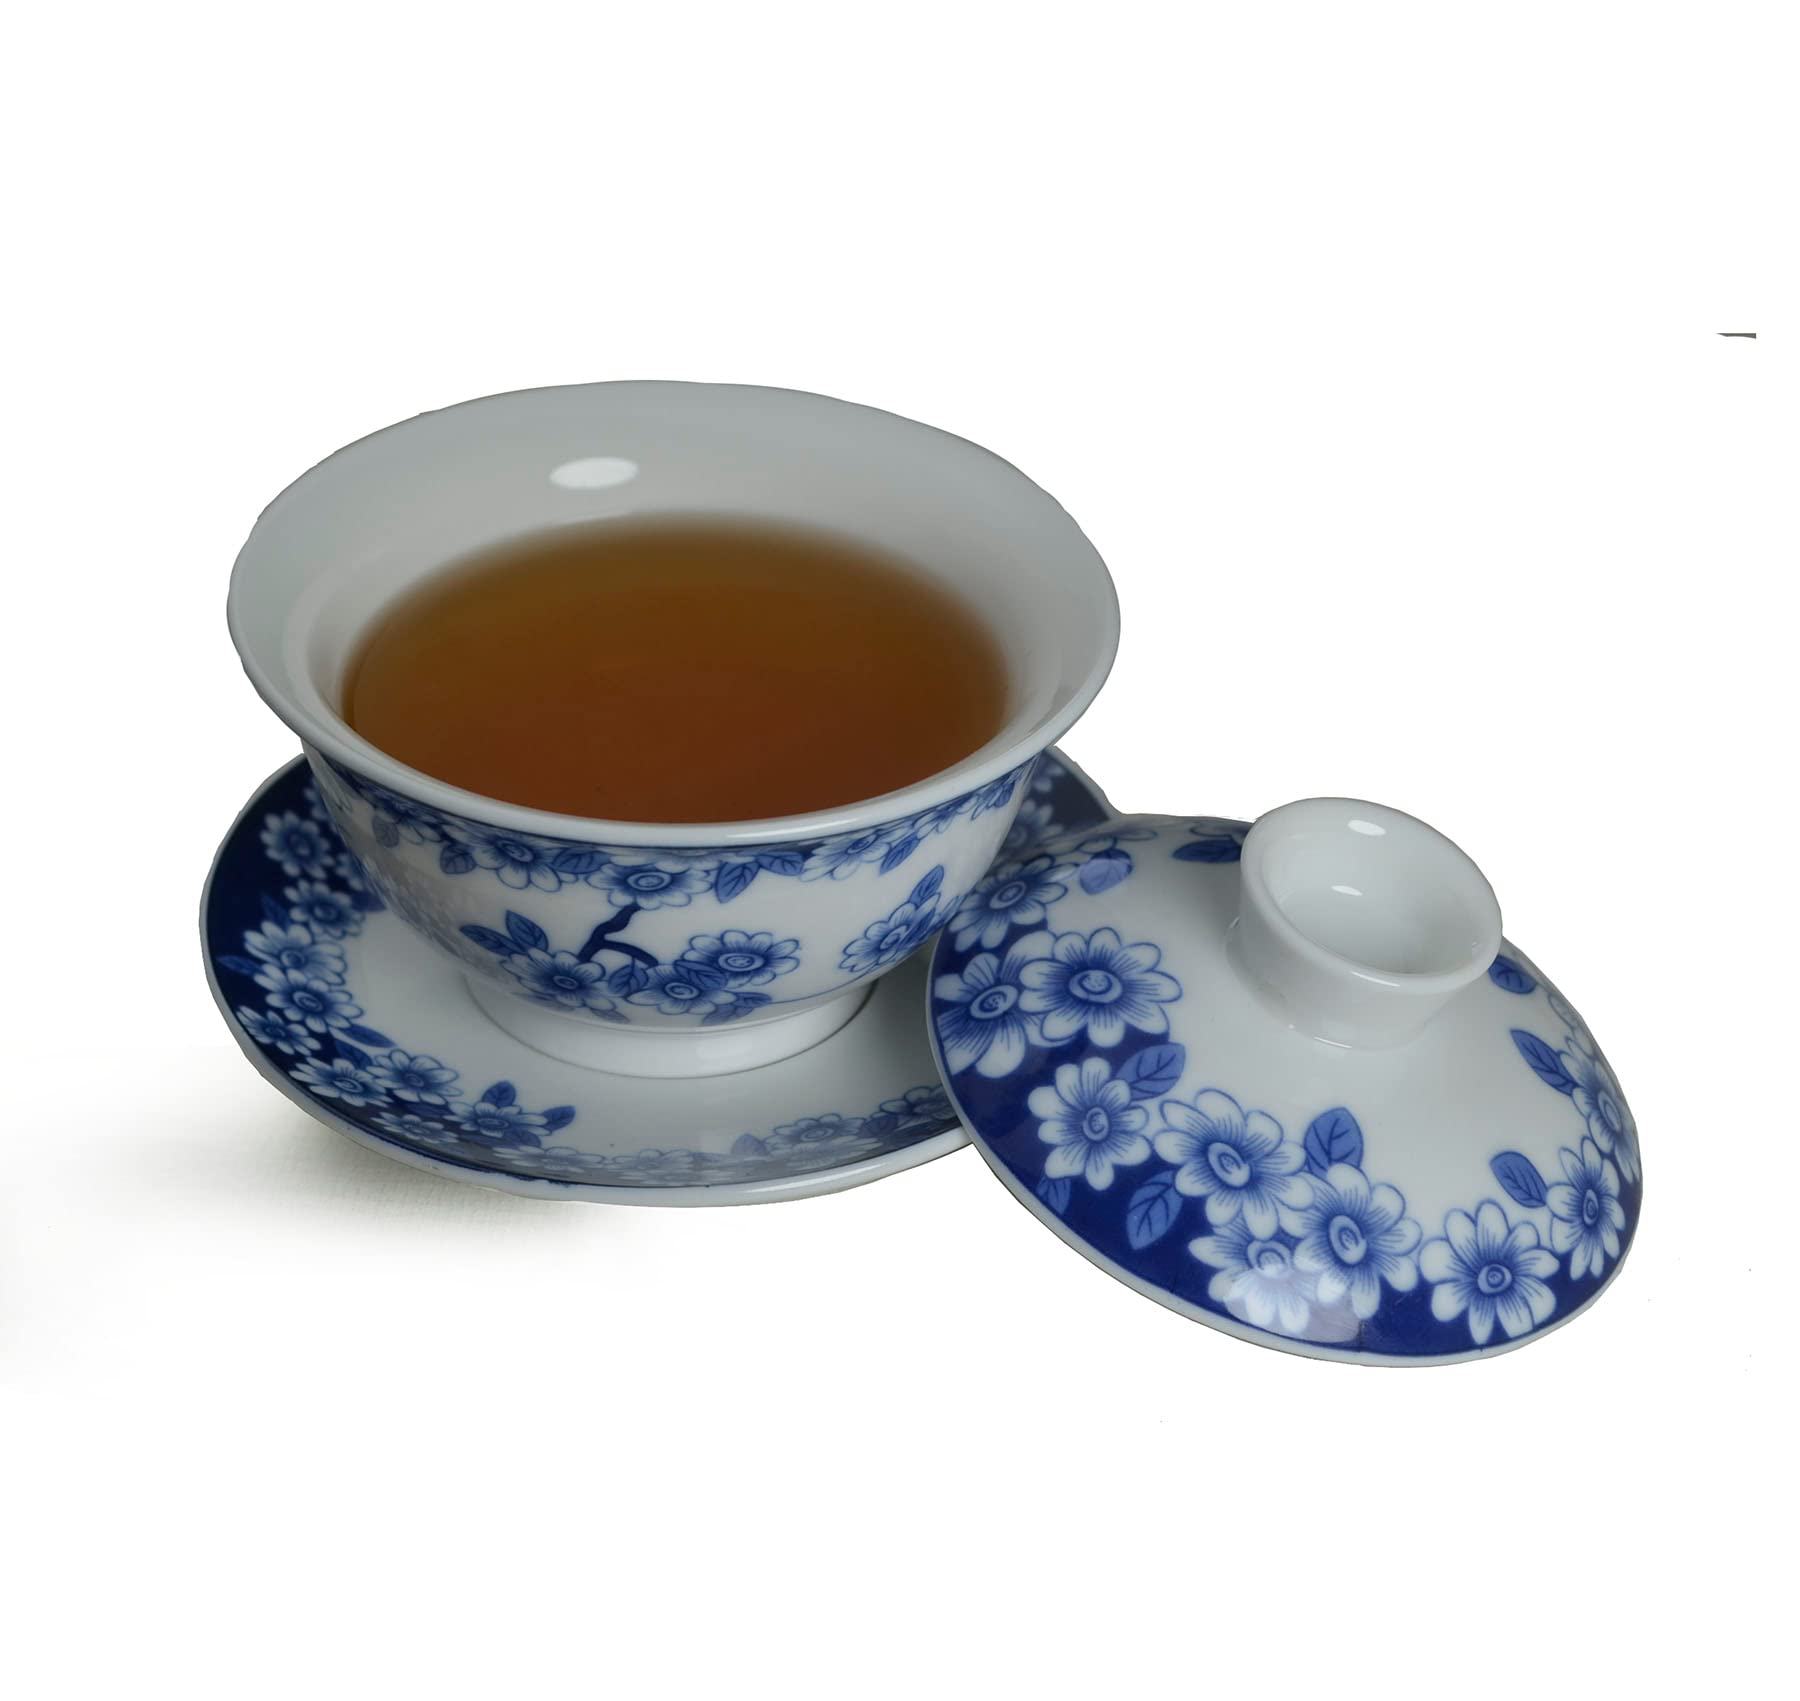 vv8oo Gaiwan 6oz Teacup Chinese Gongfu Tea Set Blue and White Porcelain Tea Cups Ceramic Tureen Teacup Sancai Cover Bowl with Lip Saucer Love of Butterfly (Love of Butterfly)